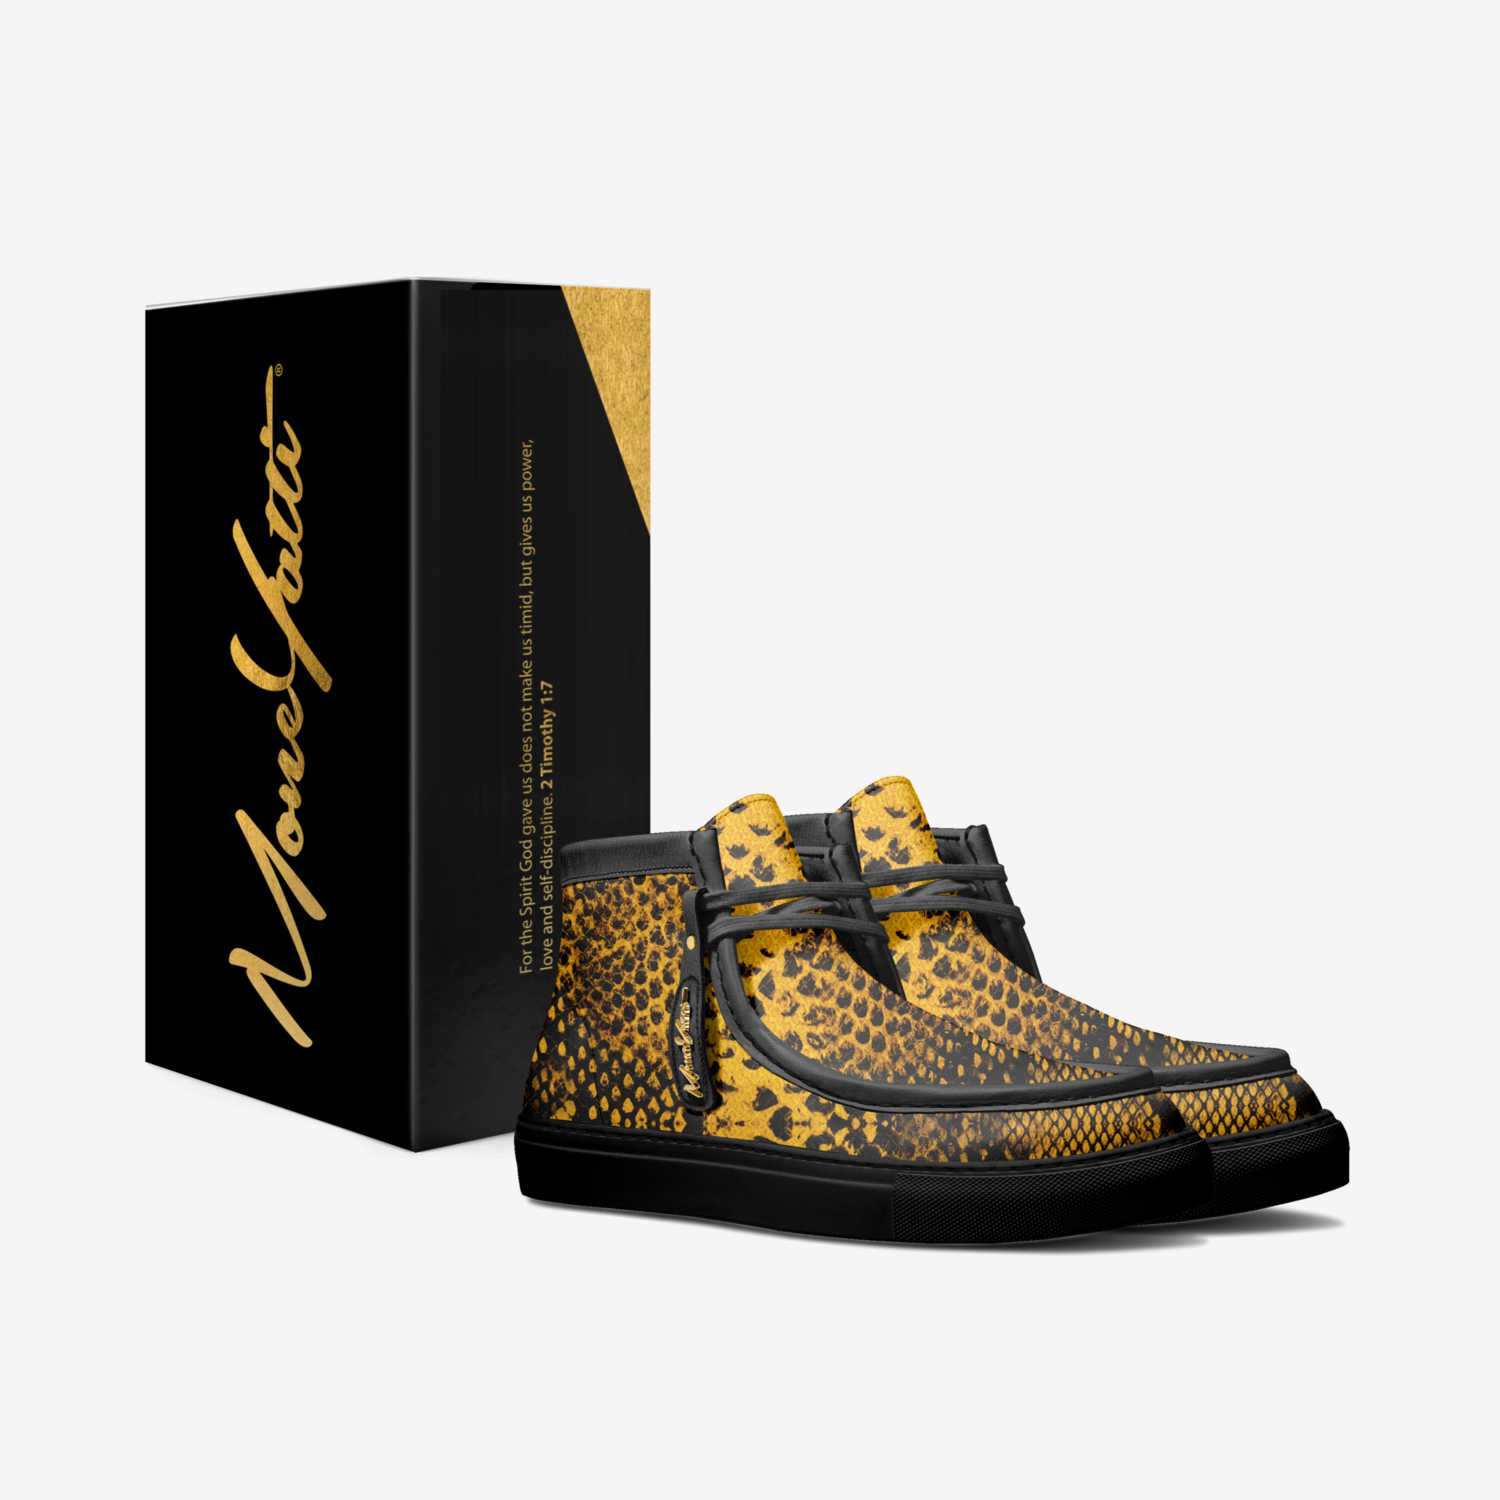 LUX 018 custom made in Italy shoes by Moneyatti Brand | Box view